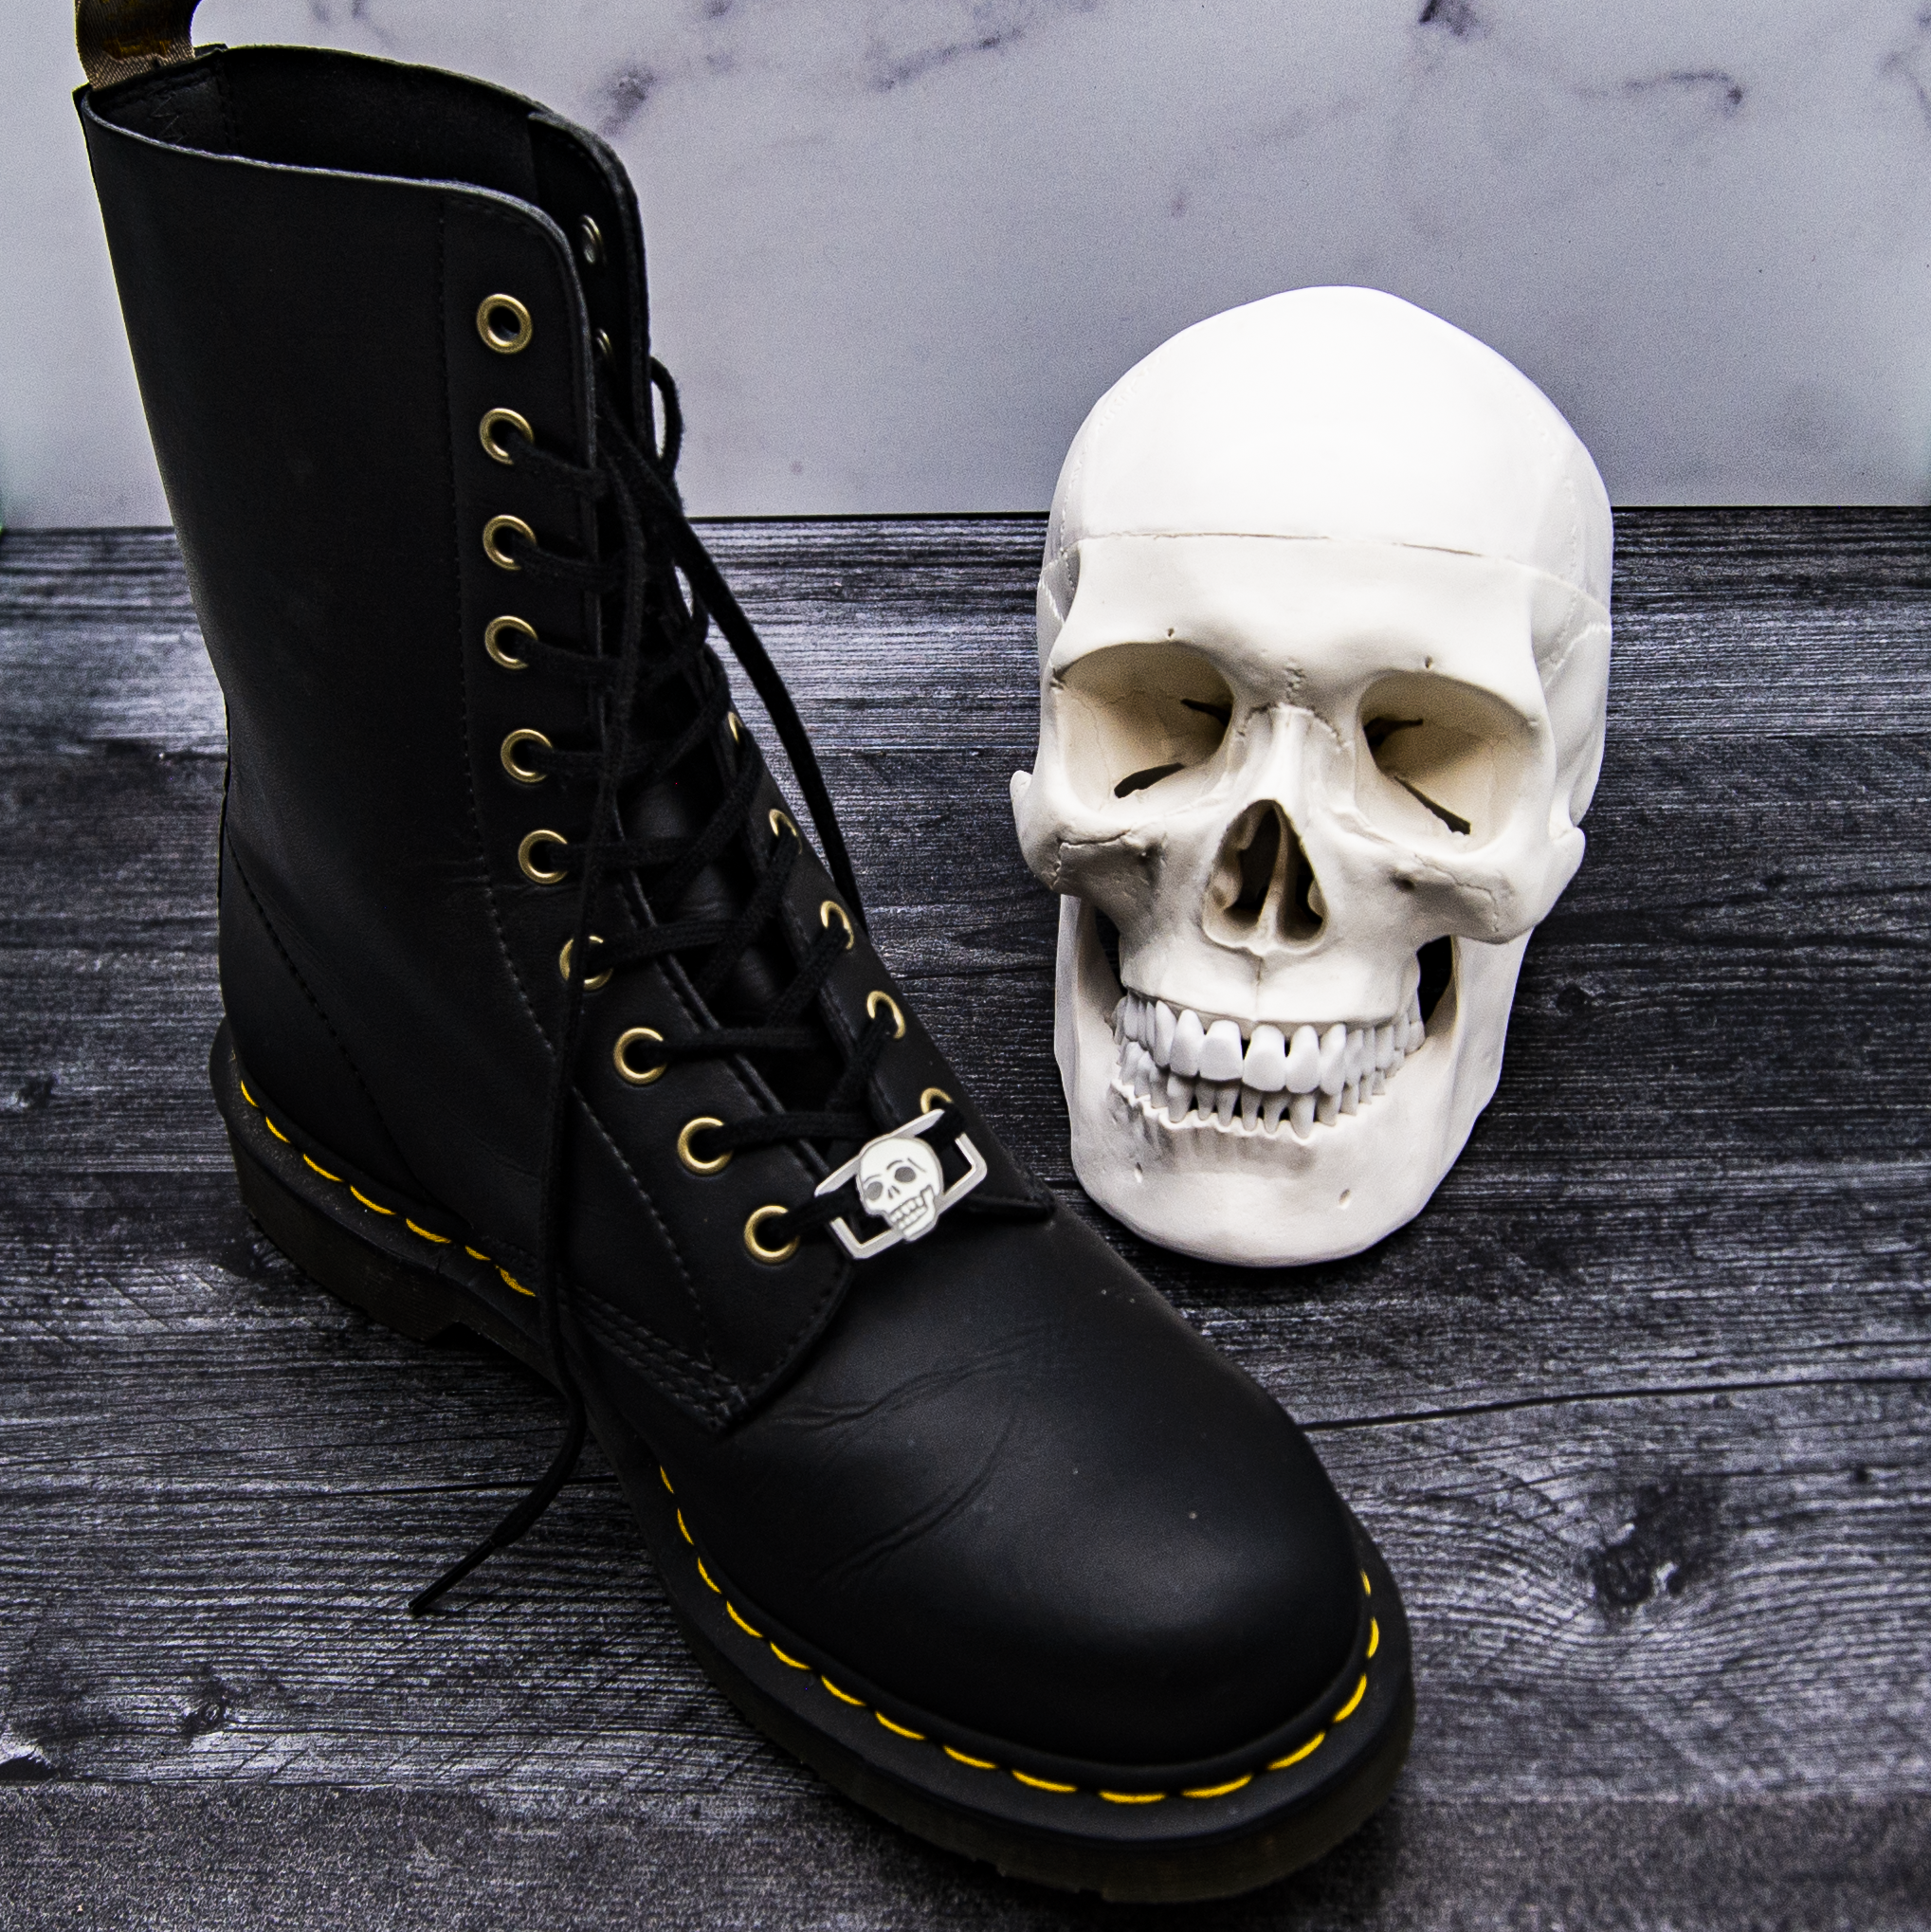 A classic black Doc Marten boot displaying a skull shoelace charm neck to a model of a human skull.